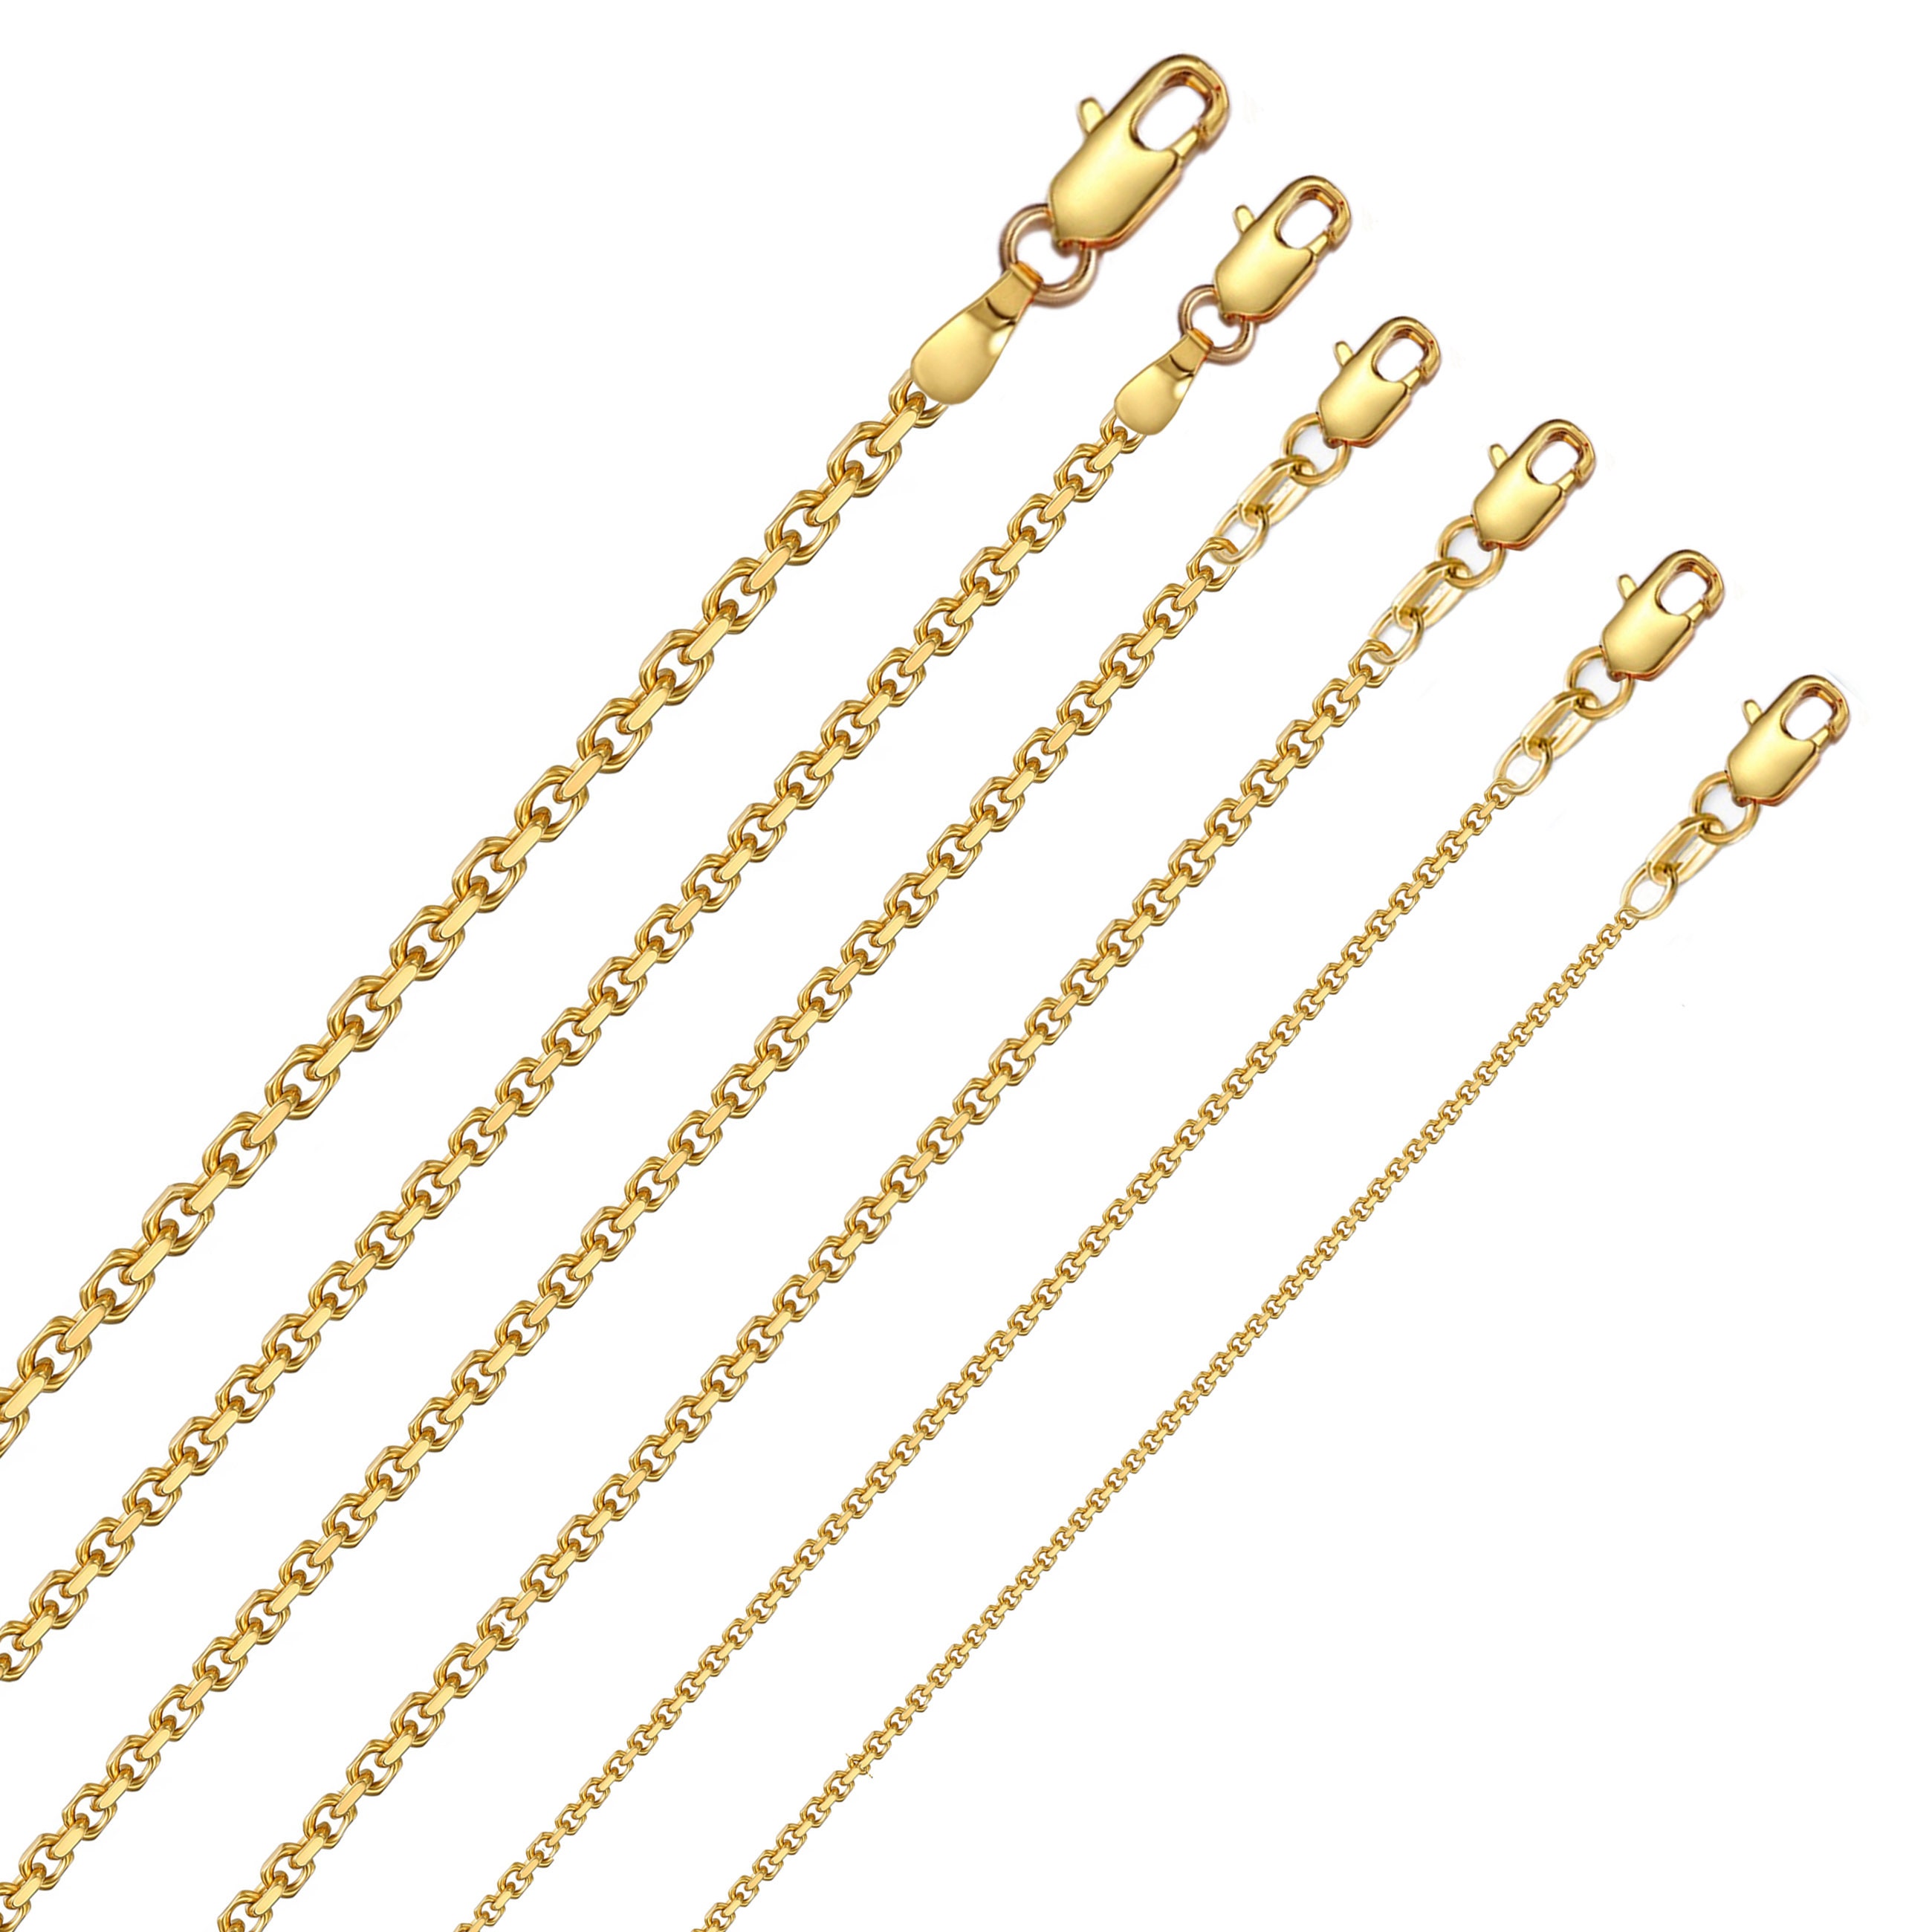 1.4mm 14K Gold-Filled Chain Necklace By Bliss Jewelry